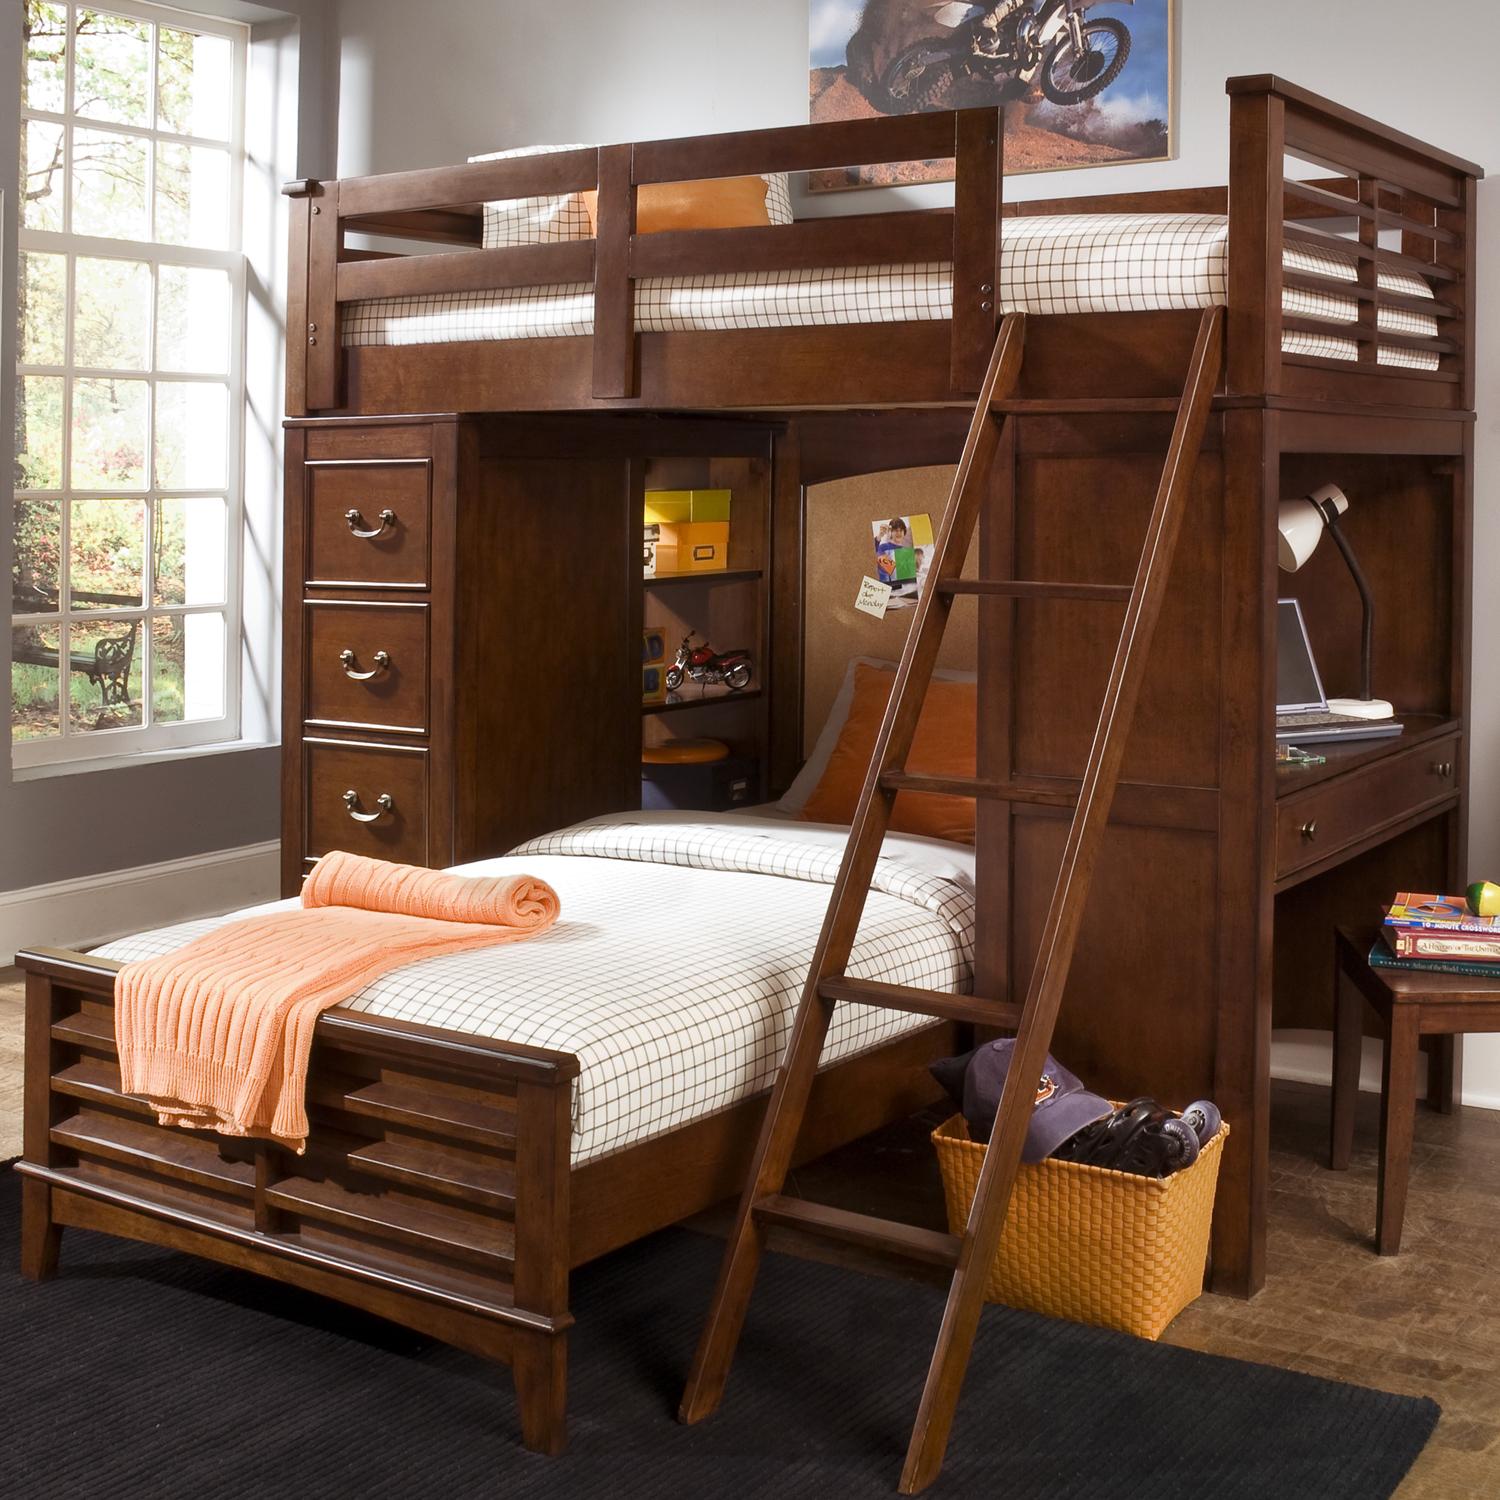 bunk bed with desk at the bottom